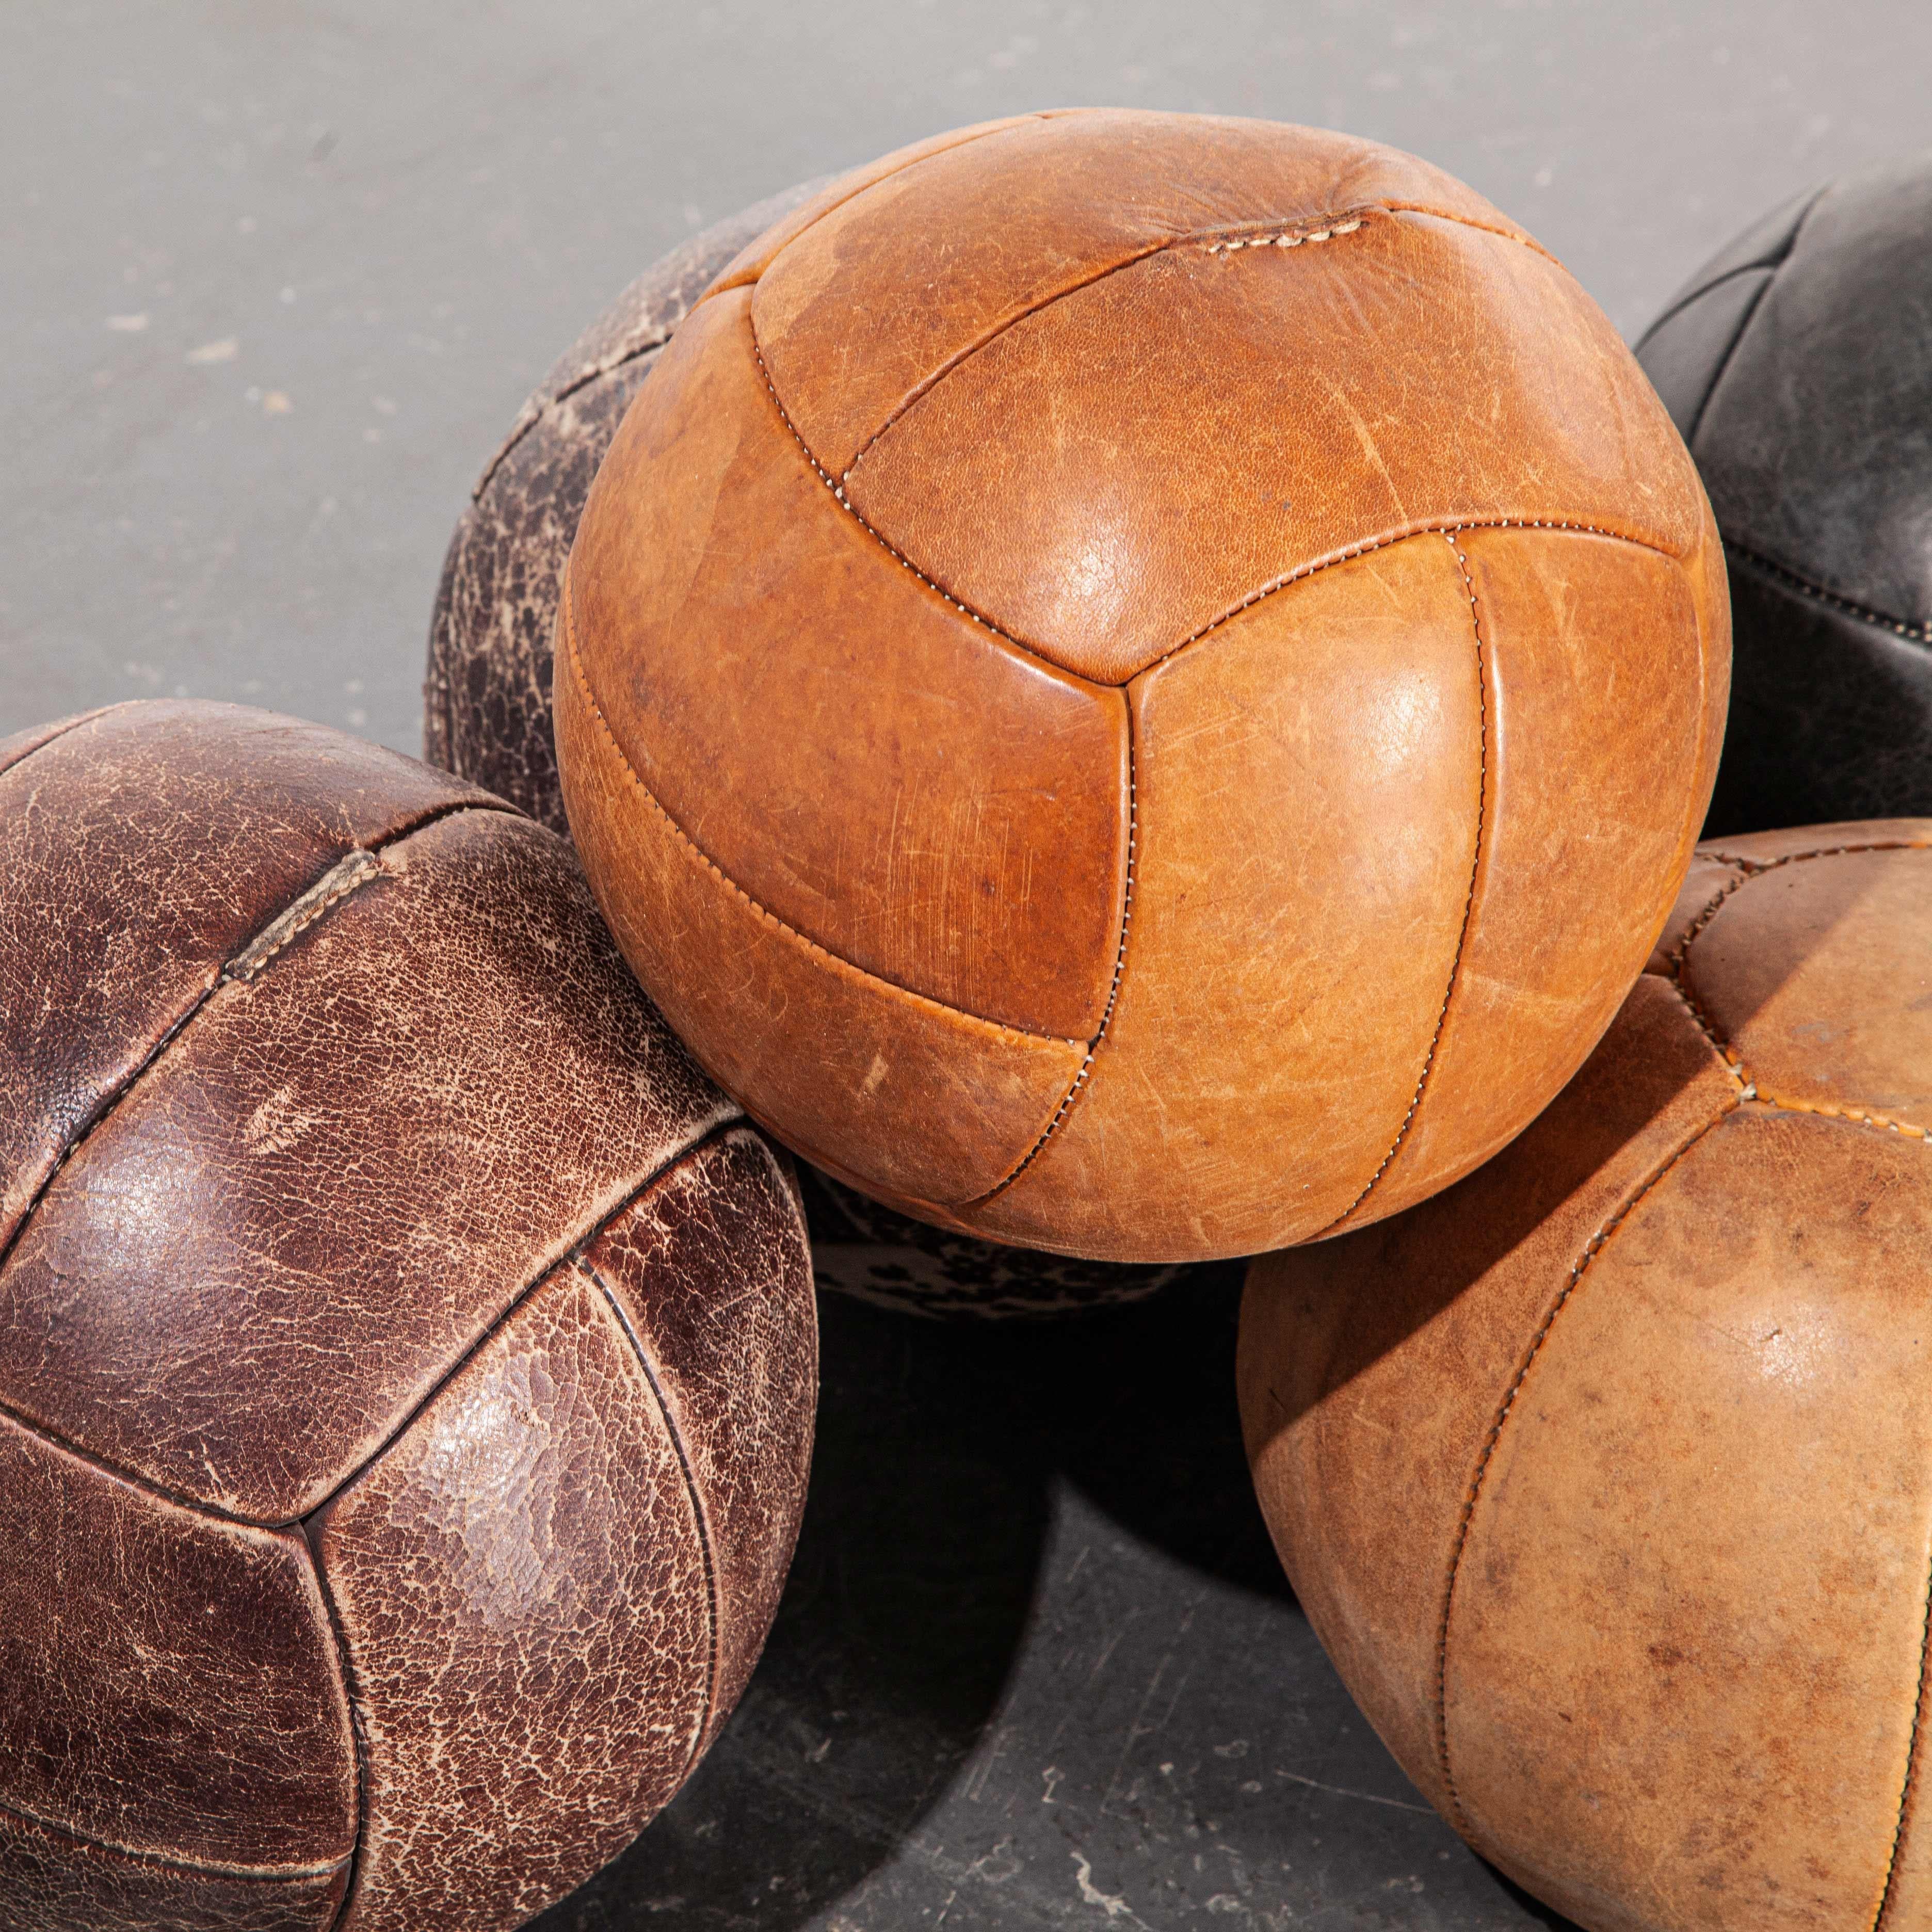 1950s large Czech leather medicine balls – decorative. We have a number of these large handsome worn leather medicine balls that are just full of character.

Workshop report
Our workshop team inspect every product and carry out any needed repairs